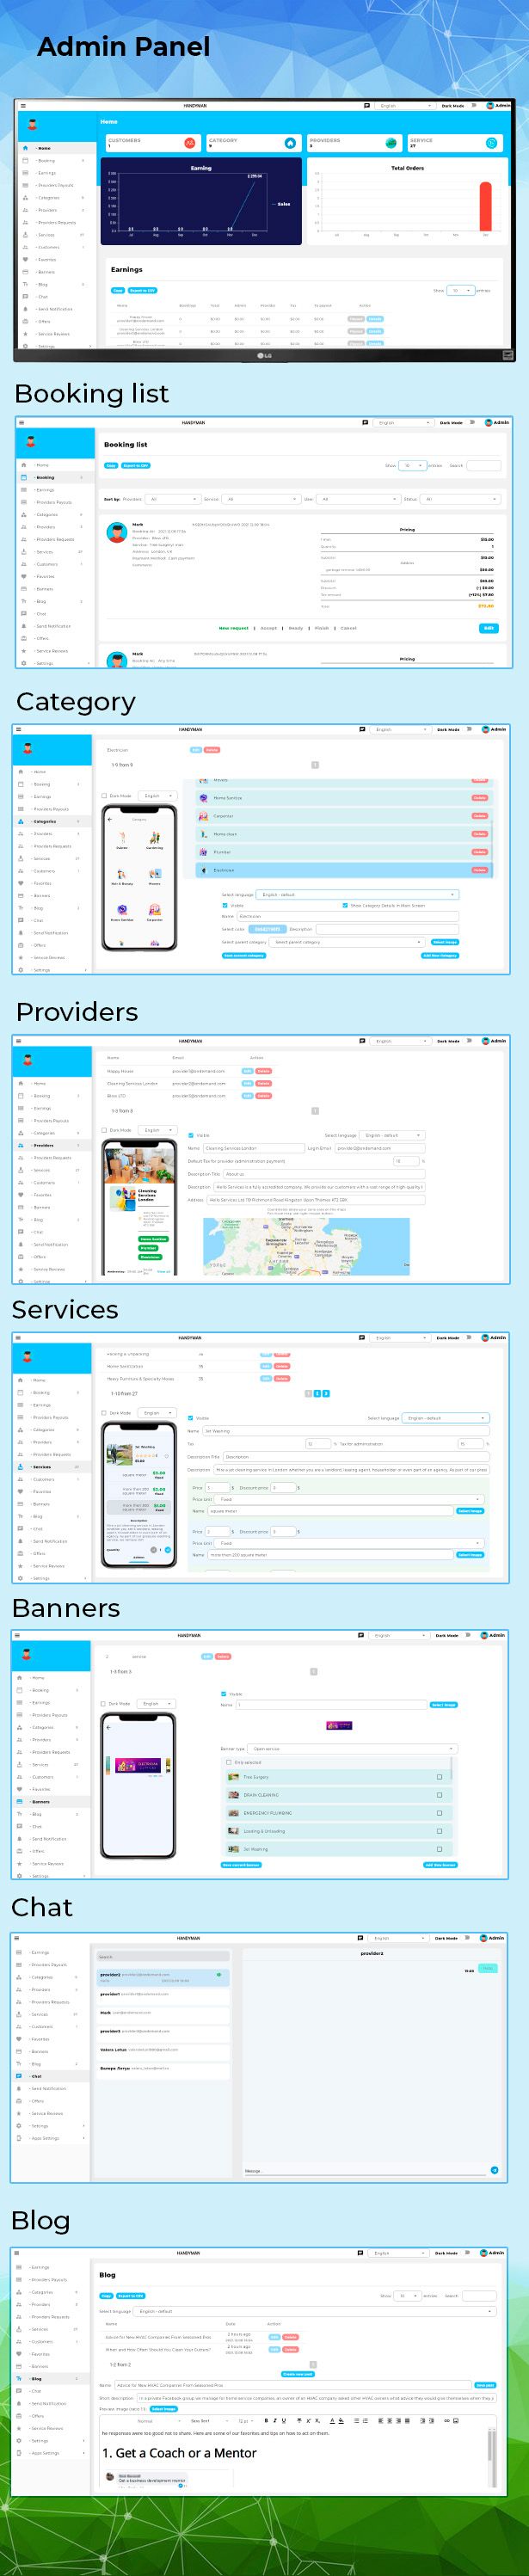 On Demand Service Solution | 4 Apps | Customer+Provider+Admin Panel+WebSite | Flutter (iOS+Android) - 6